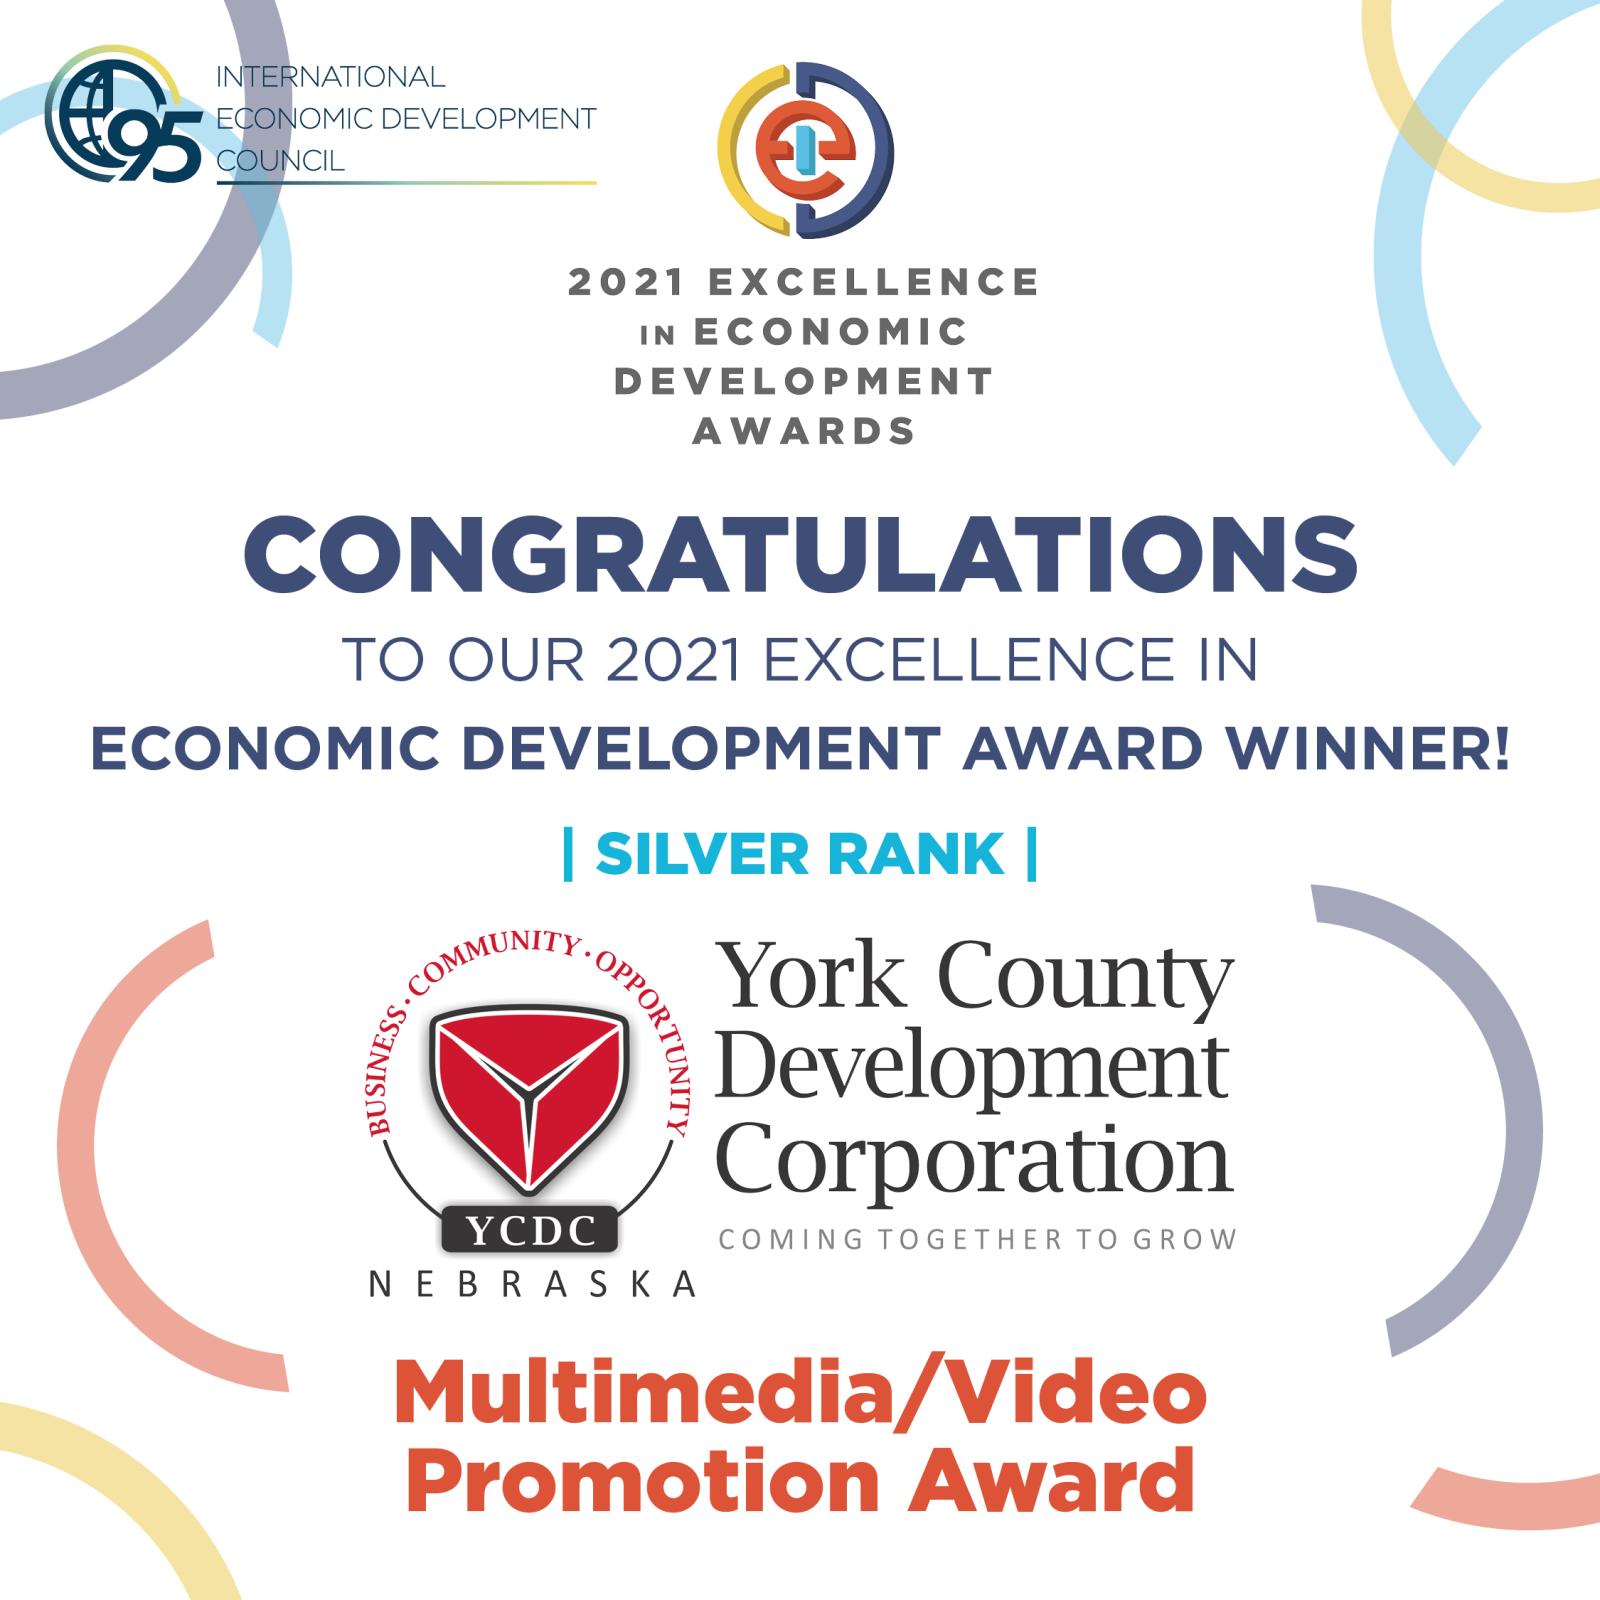 York County Development Corporation Receives Excellence in Economic Development Award from the International Economic Development Council Photo